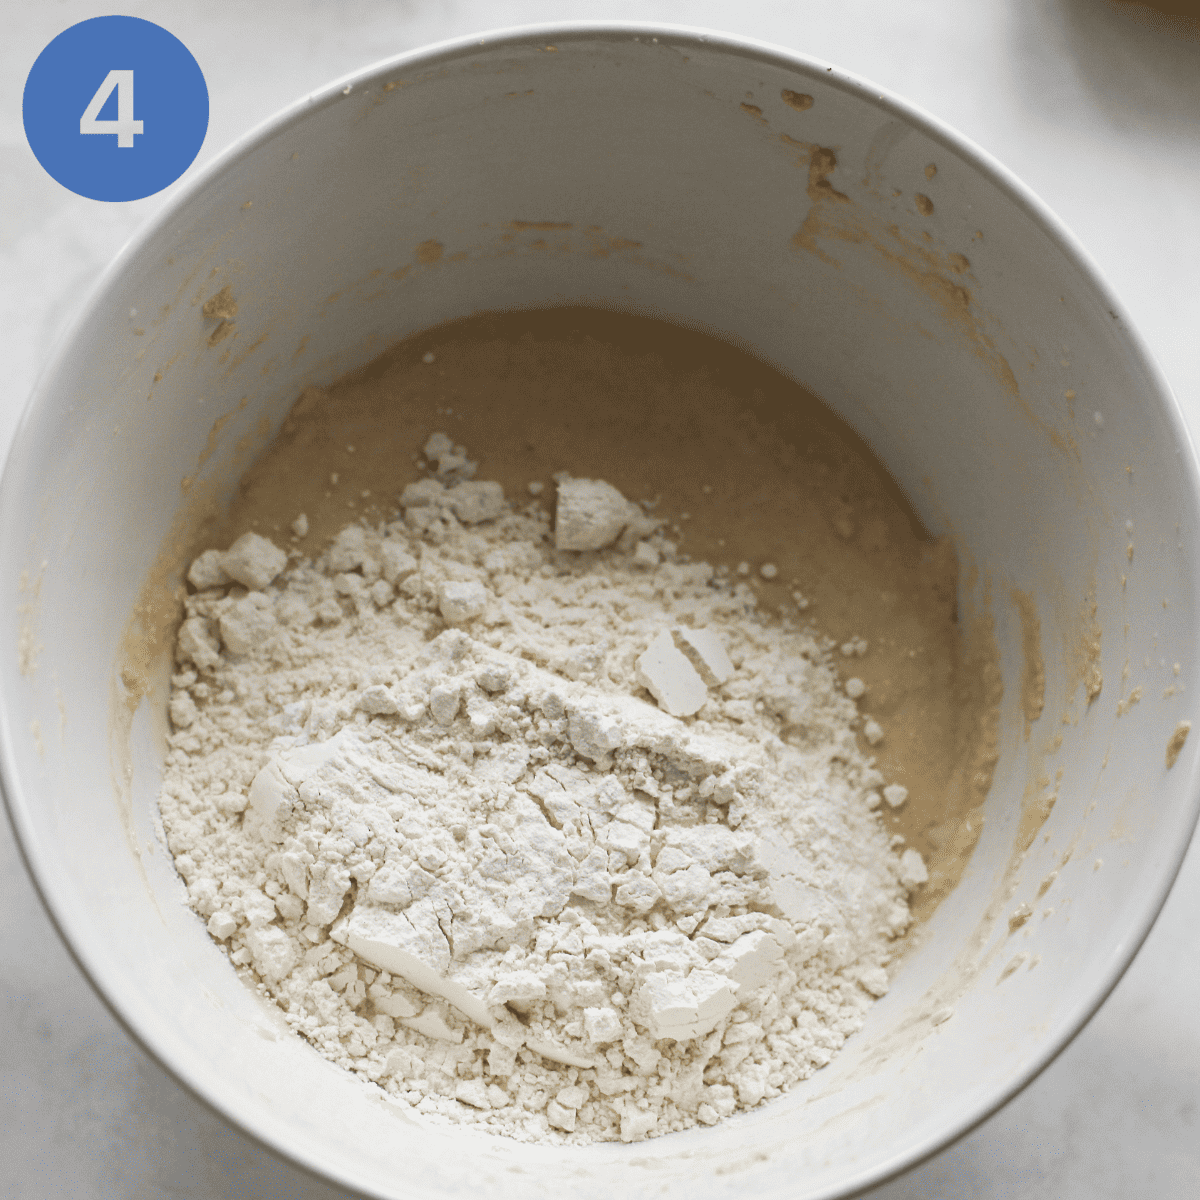 Sifting in flour to cake batter.